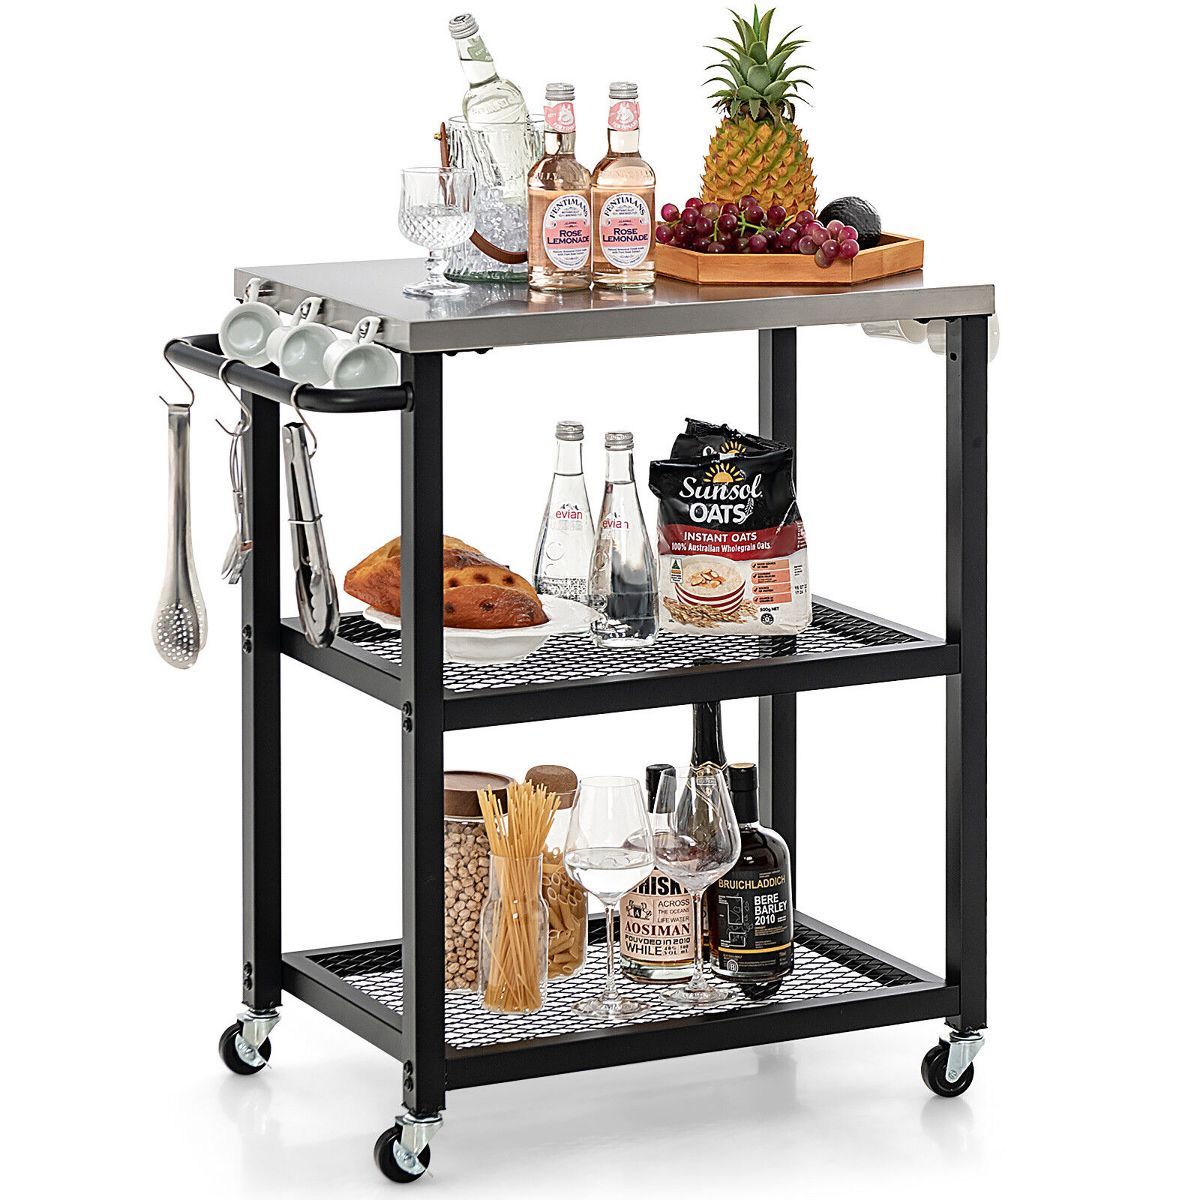 Tangkula 3-tier Outdoor Grill Cart on Wheels w/ Stainless Steel Top & Handle 3 Hooks Patio | Target